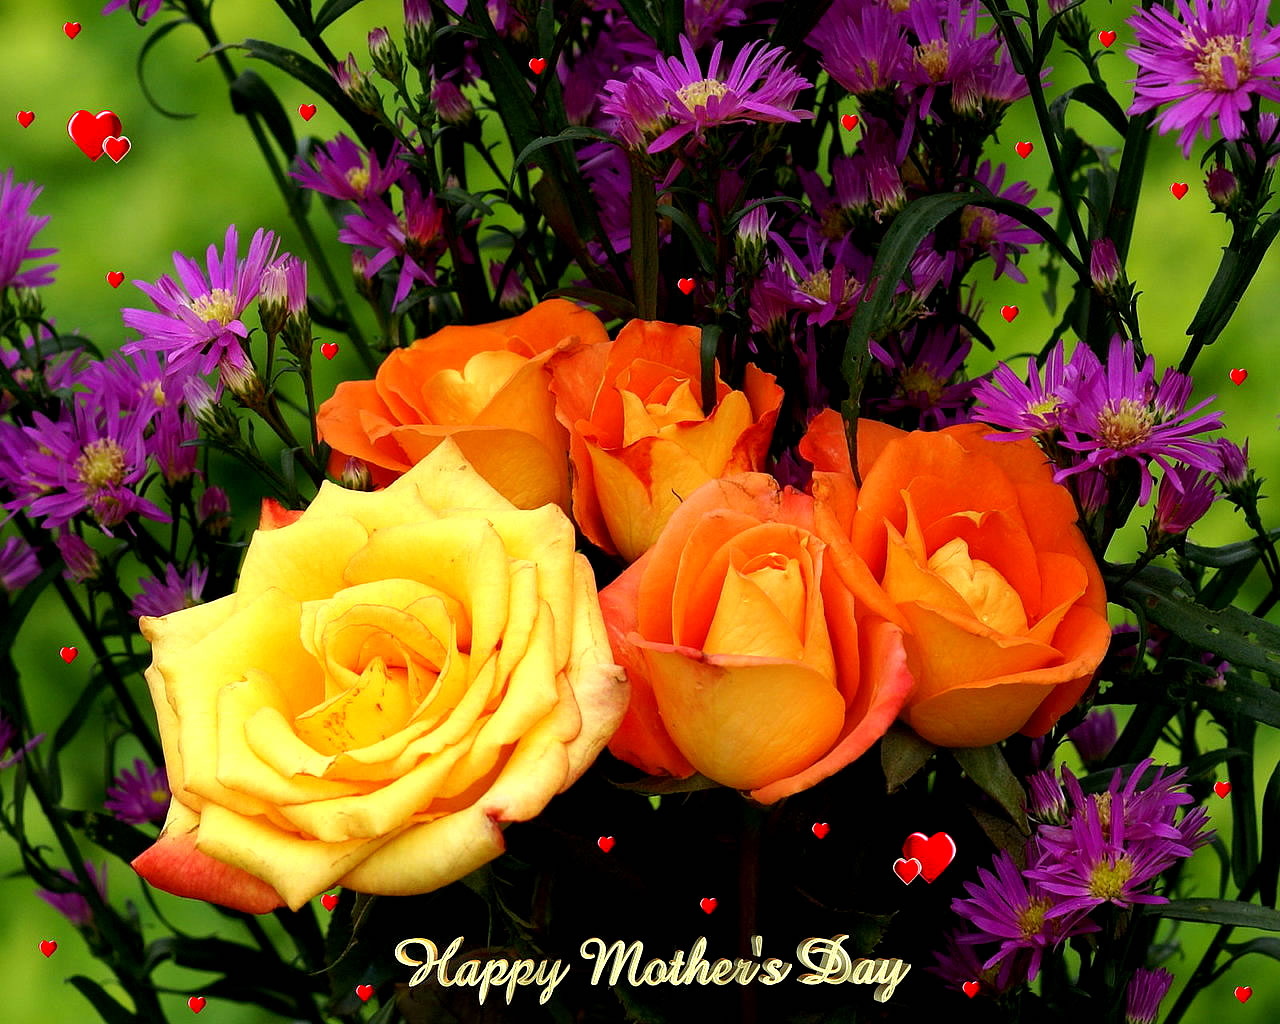 HD Wallpapers 2011 Happy Mother's Day Flowers